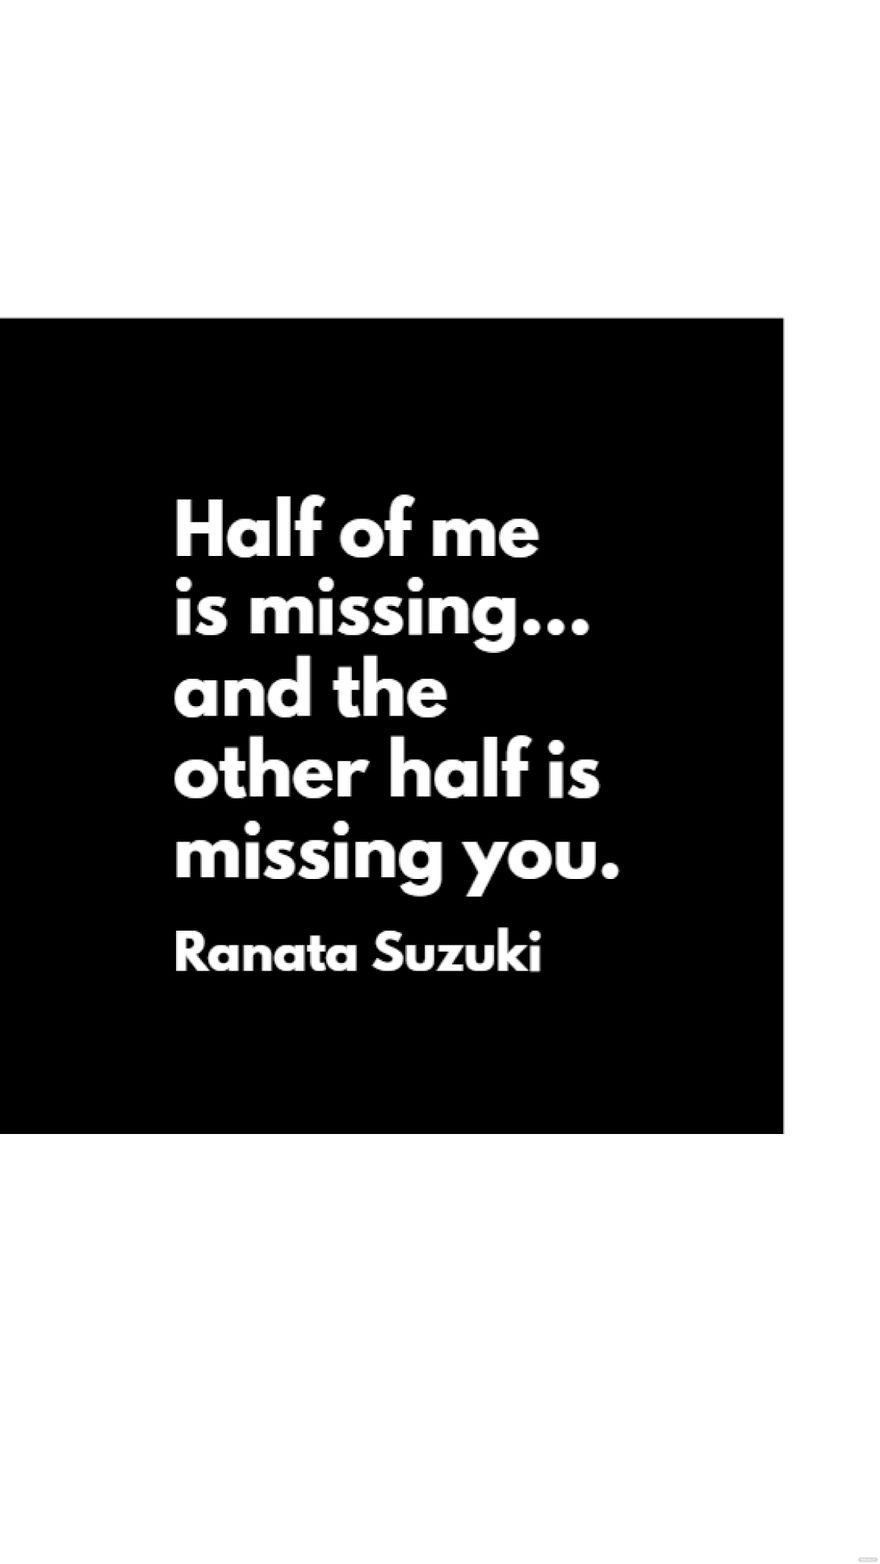 Ranata Suzuki - Half of me is missing … and the other half is missing you. in JPG